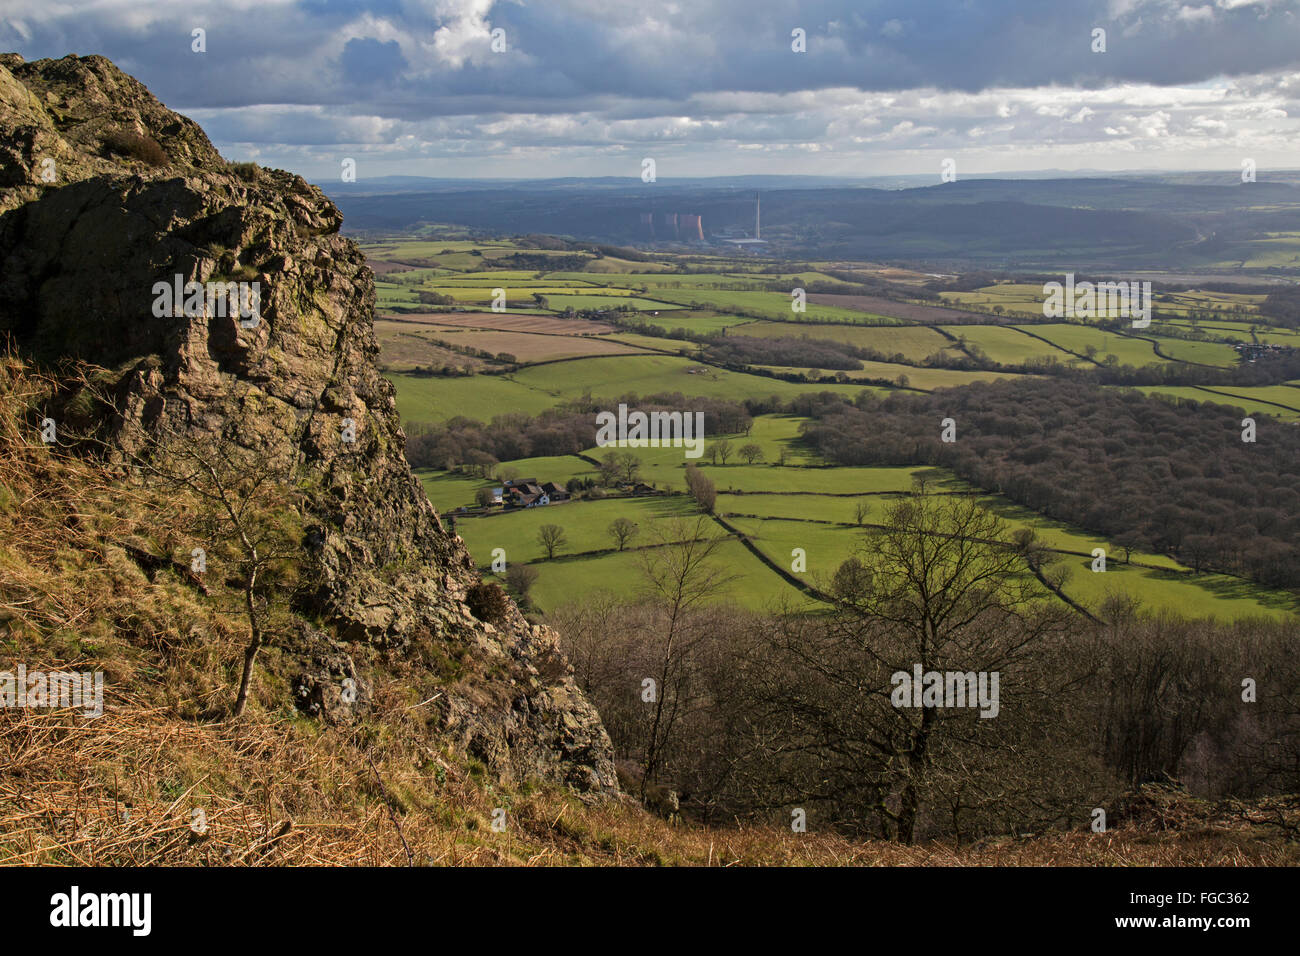 View from the Wrekin hill in Shropshire, England. Looking towards Ironbridge Power Station in the Ironbridge Gorge. Stock Photo